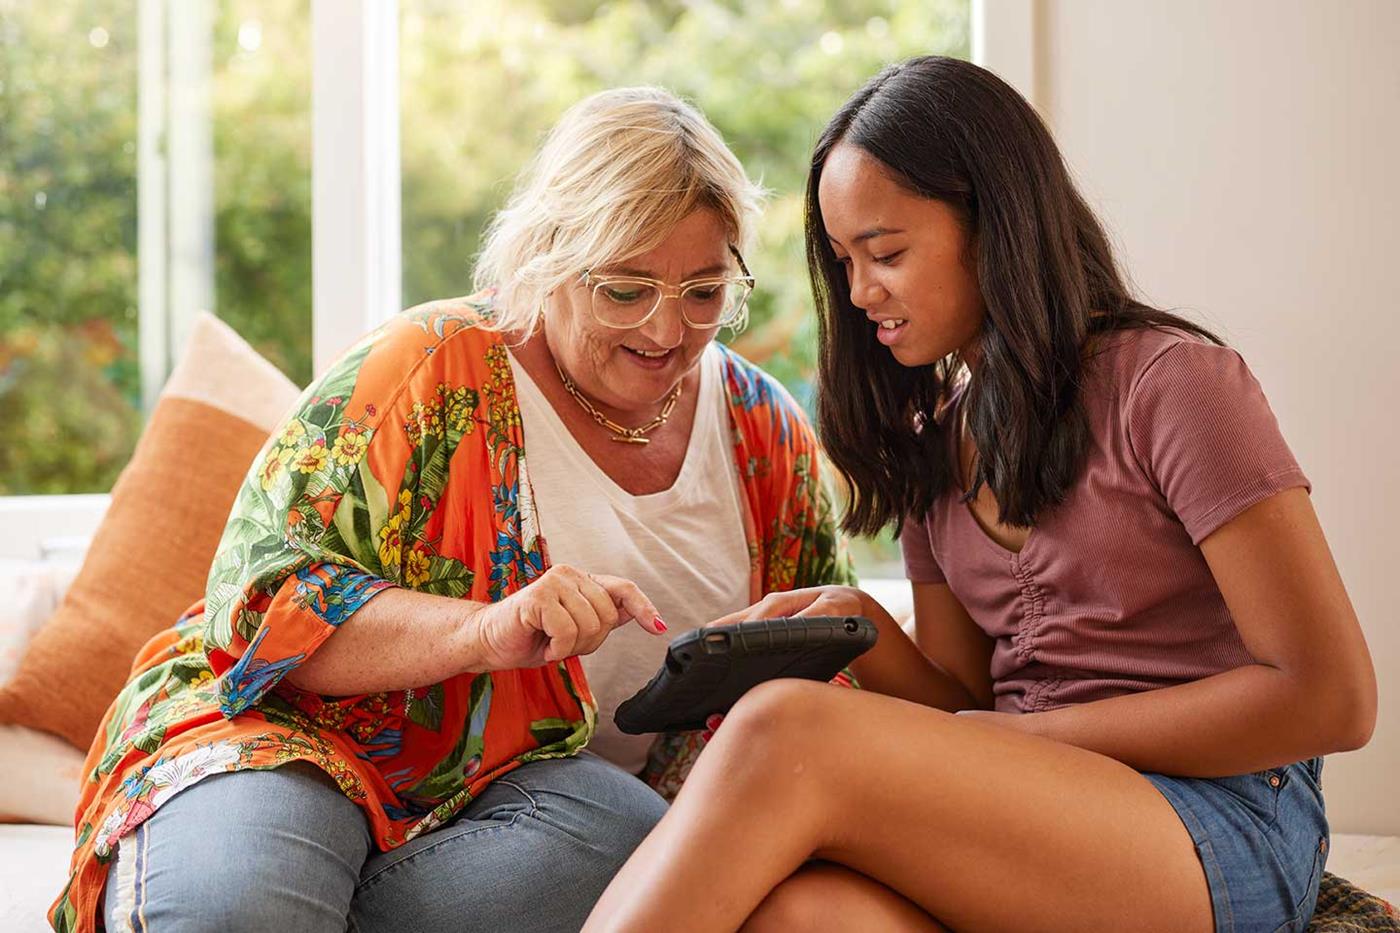 Child helping woman with ipad on a couch